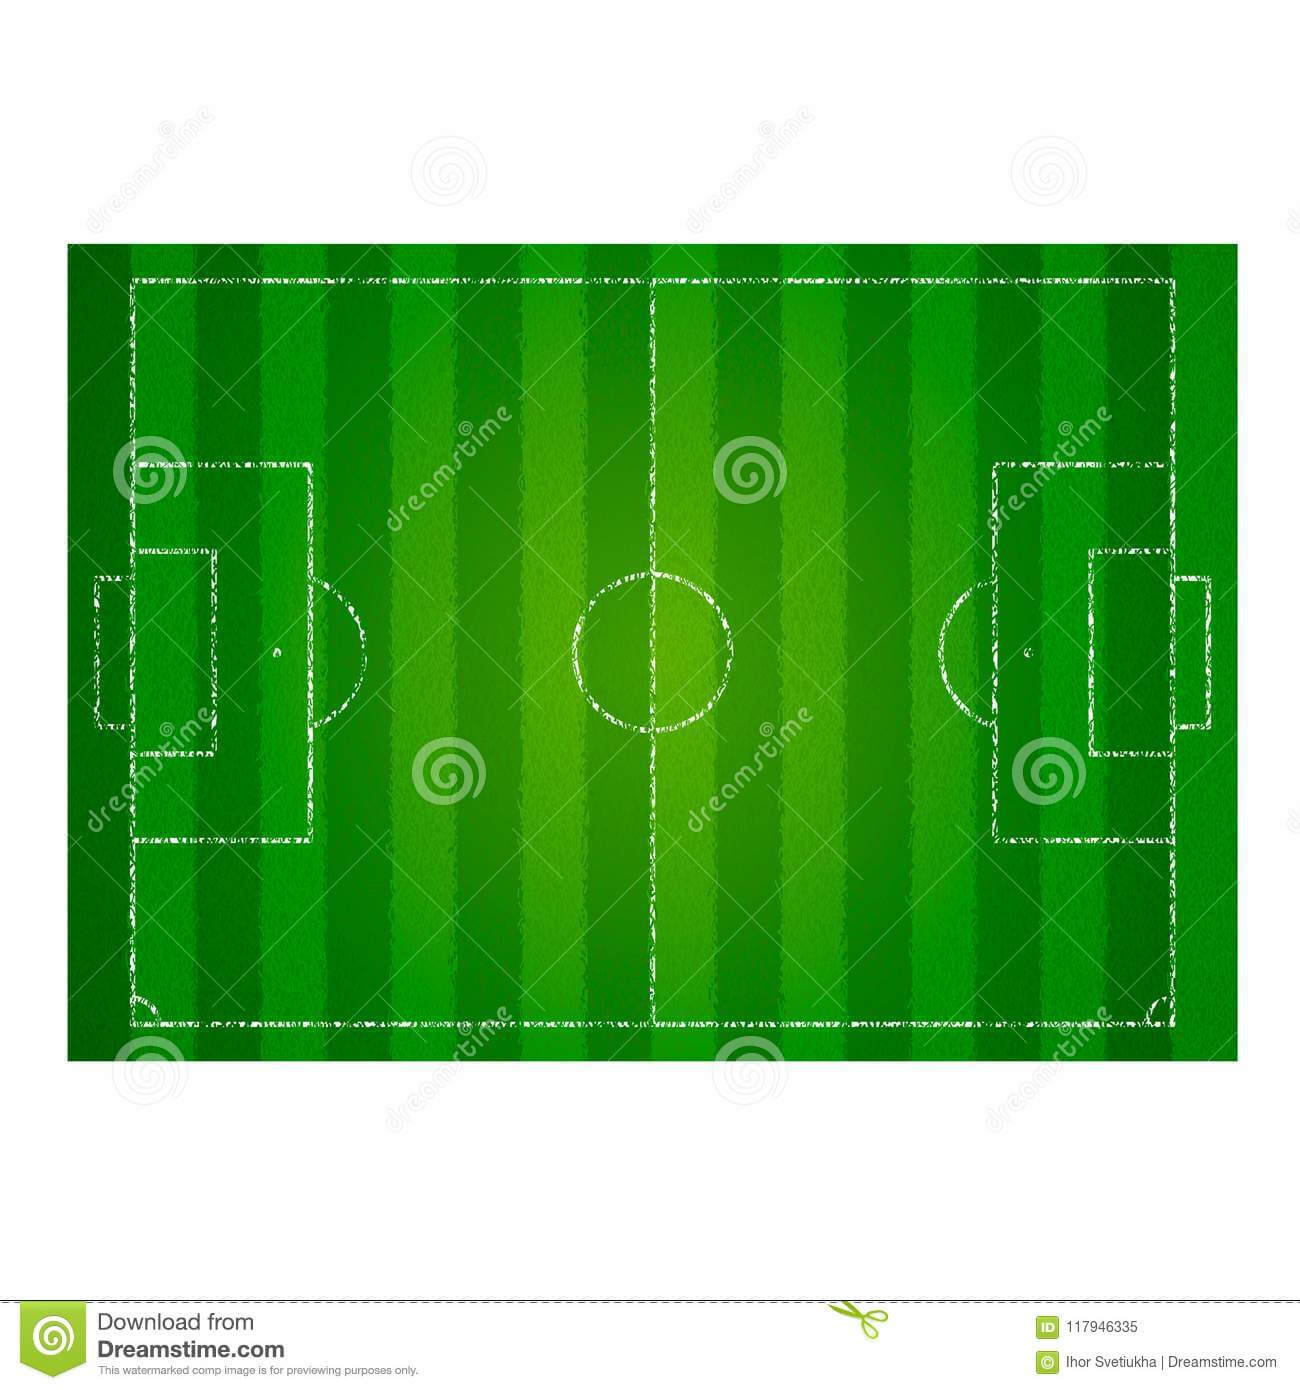 Realistic Textured Grass Football Field. Soccer Pitch. Empty Pertaining To Blank Football Field Template